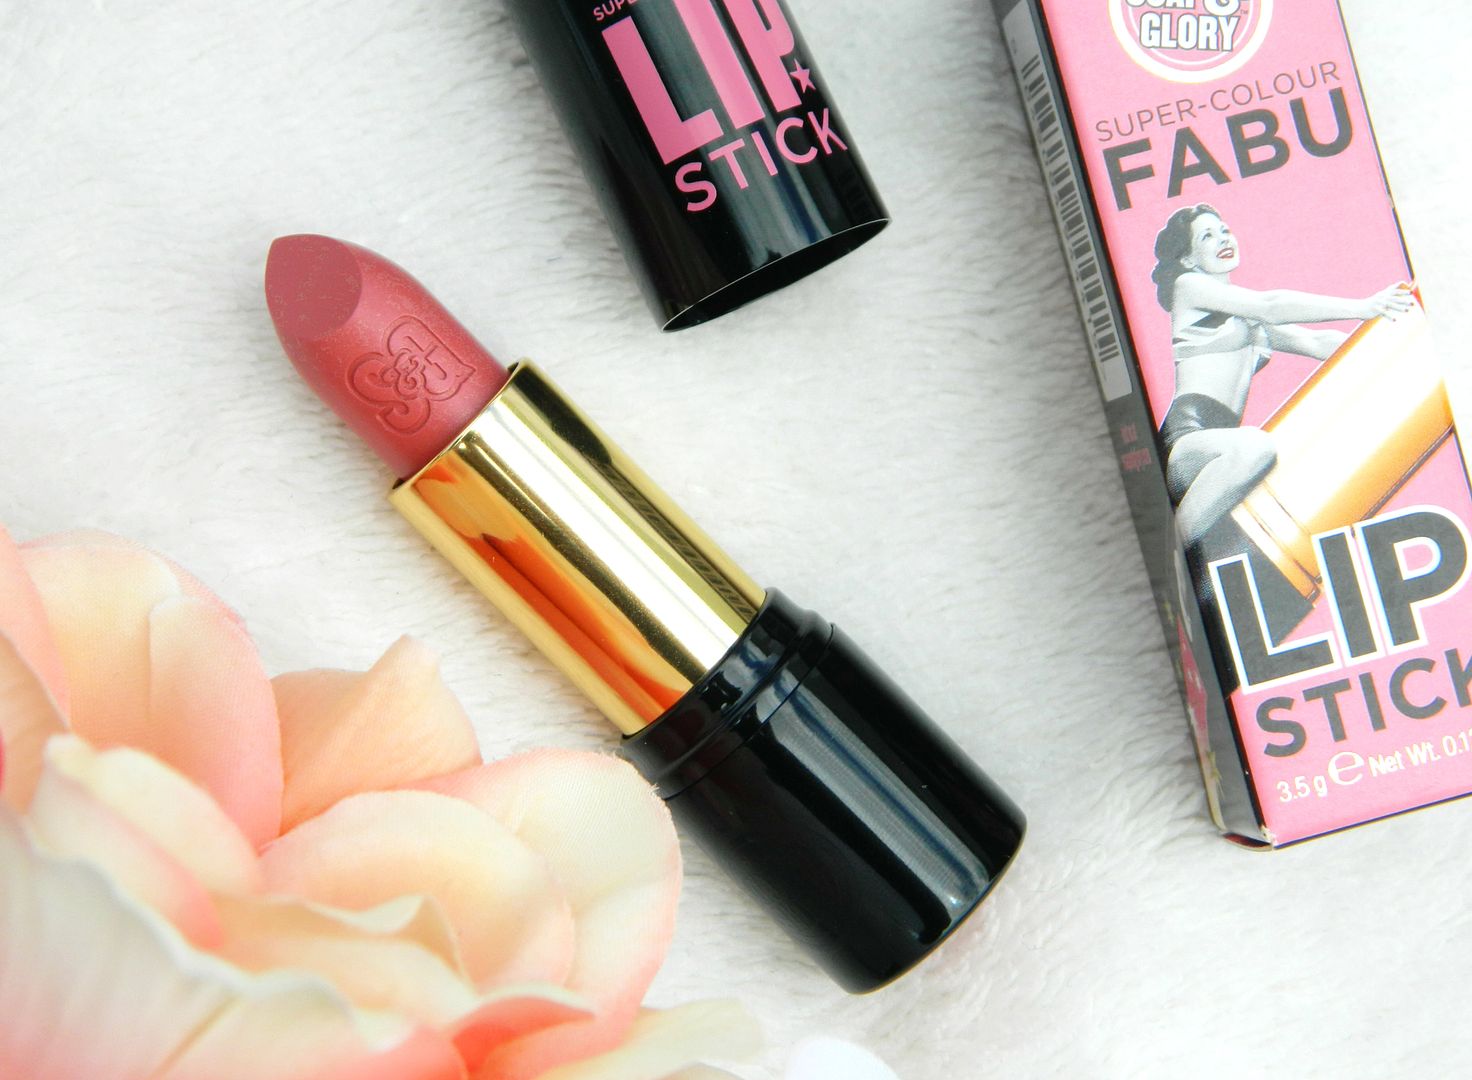 Soap And Glory Super Colour Fabu Lipstick In The Missing Pink Satin Finish Review Packaging In The Tube Bullet Belle Amie UK Beauty Fashion Lifestyle Blog